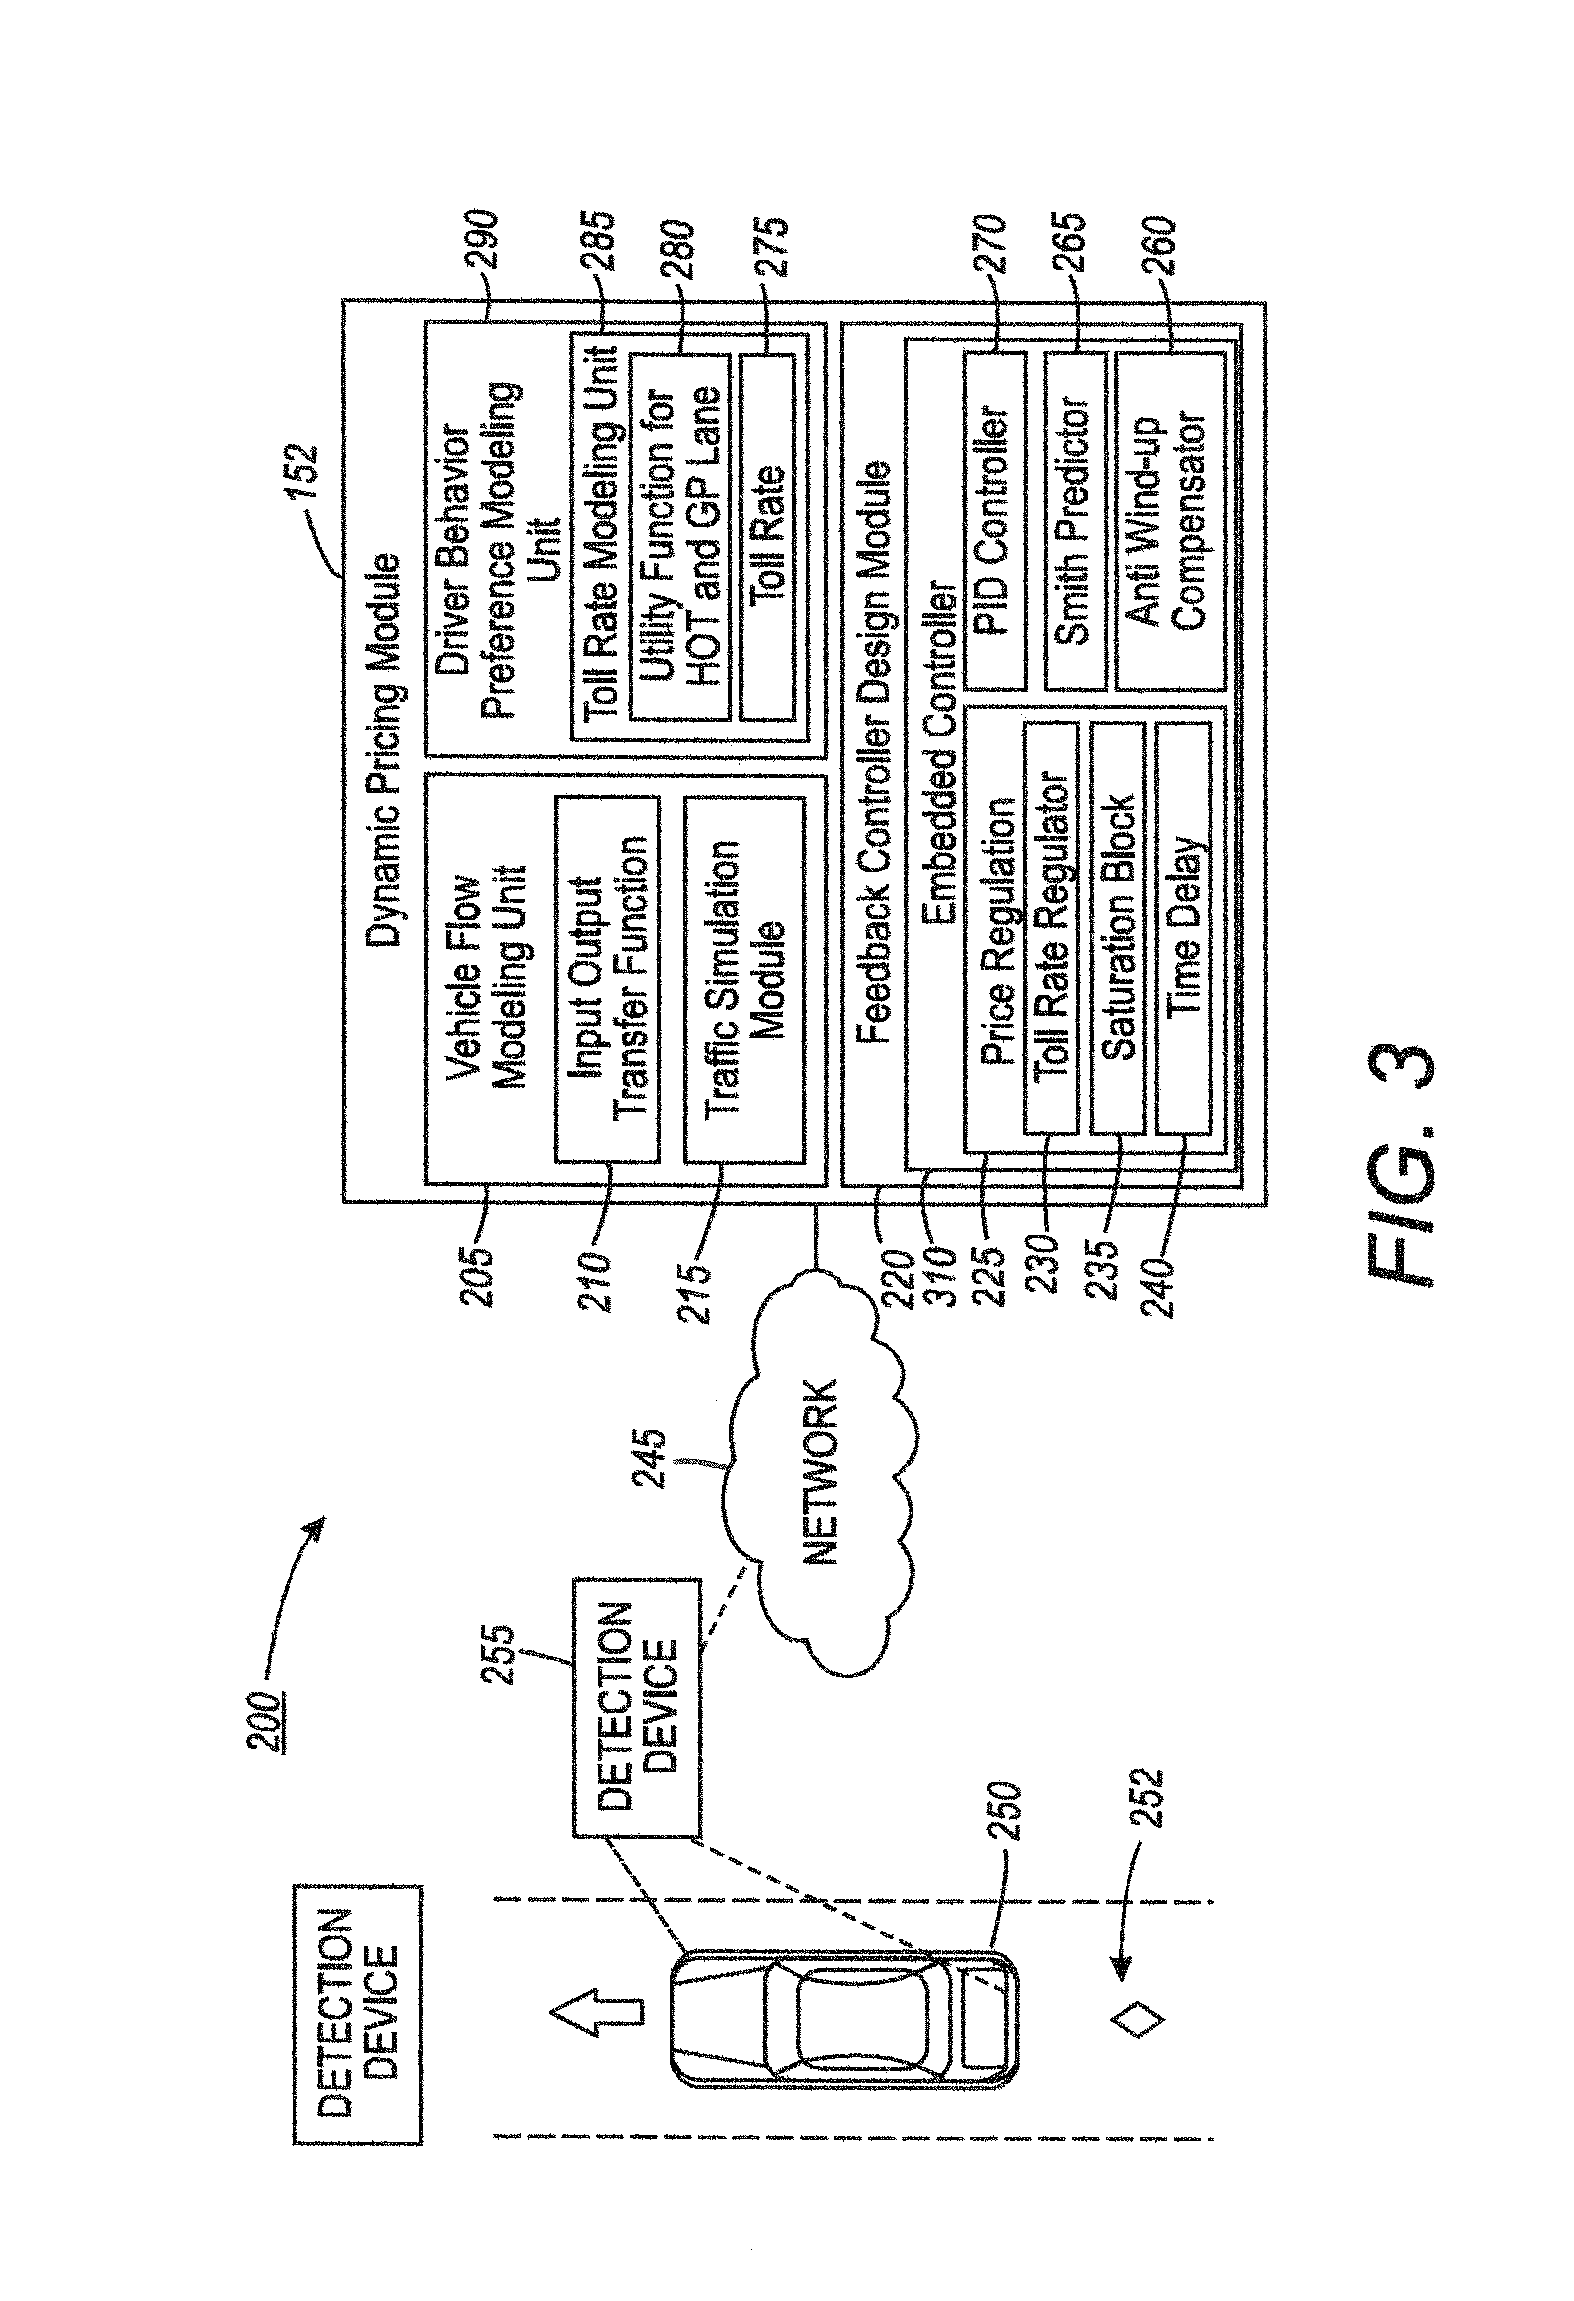 Method and system for providing dynamic pricing algorithm with embedded controller for high occupancy toll lanes